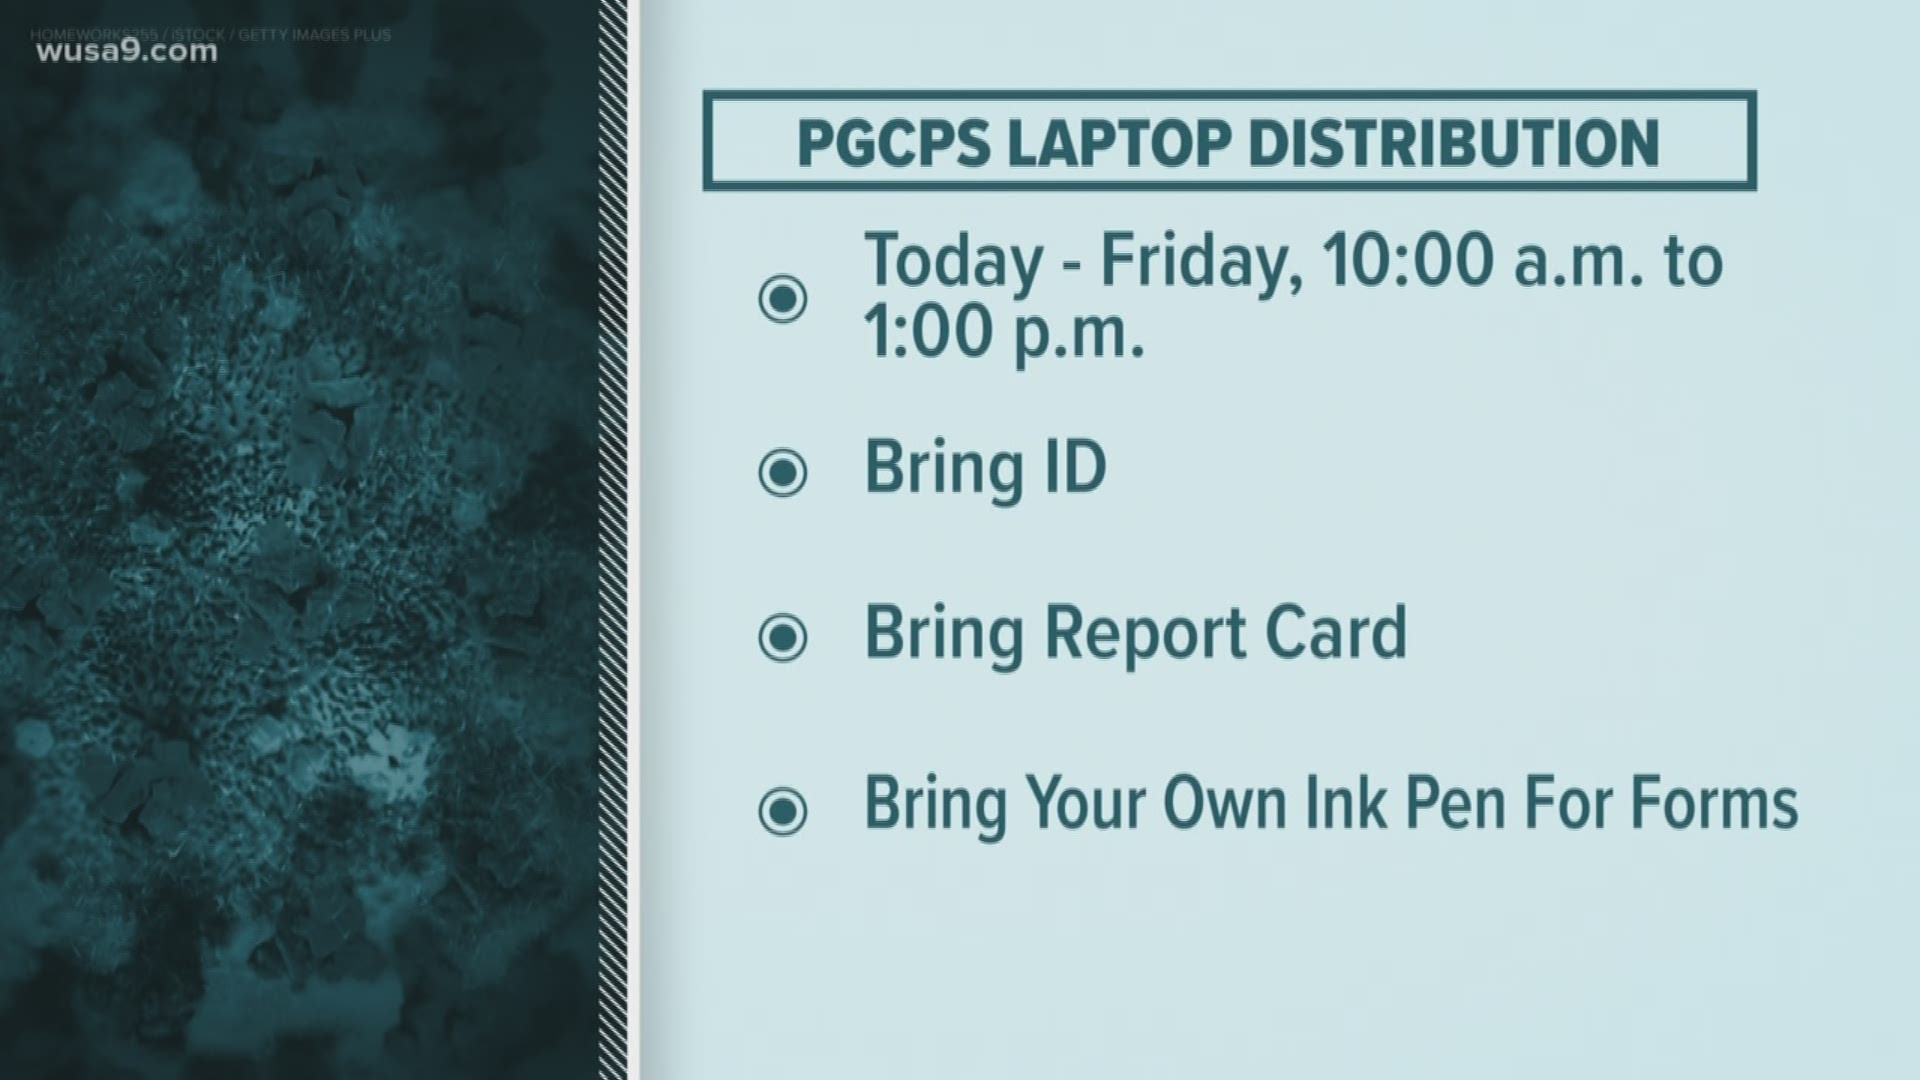 Now that school systems are moving virtually, Prince George's County has sent out information on how students can pick up a laptop to continue the school year online